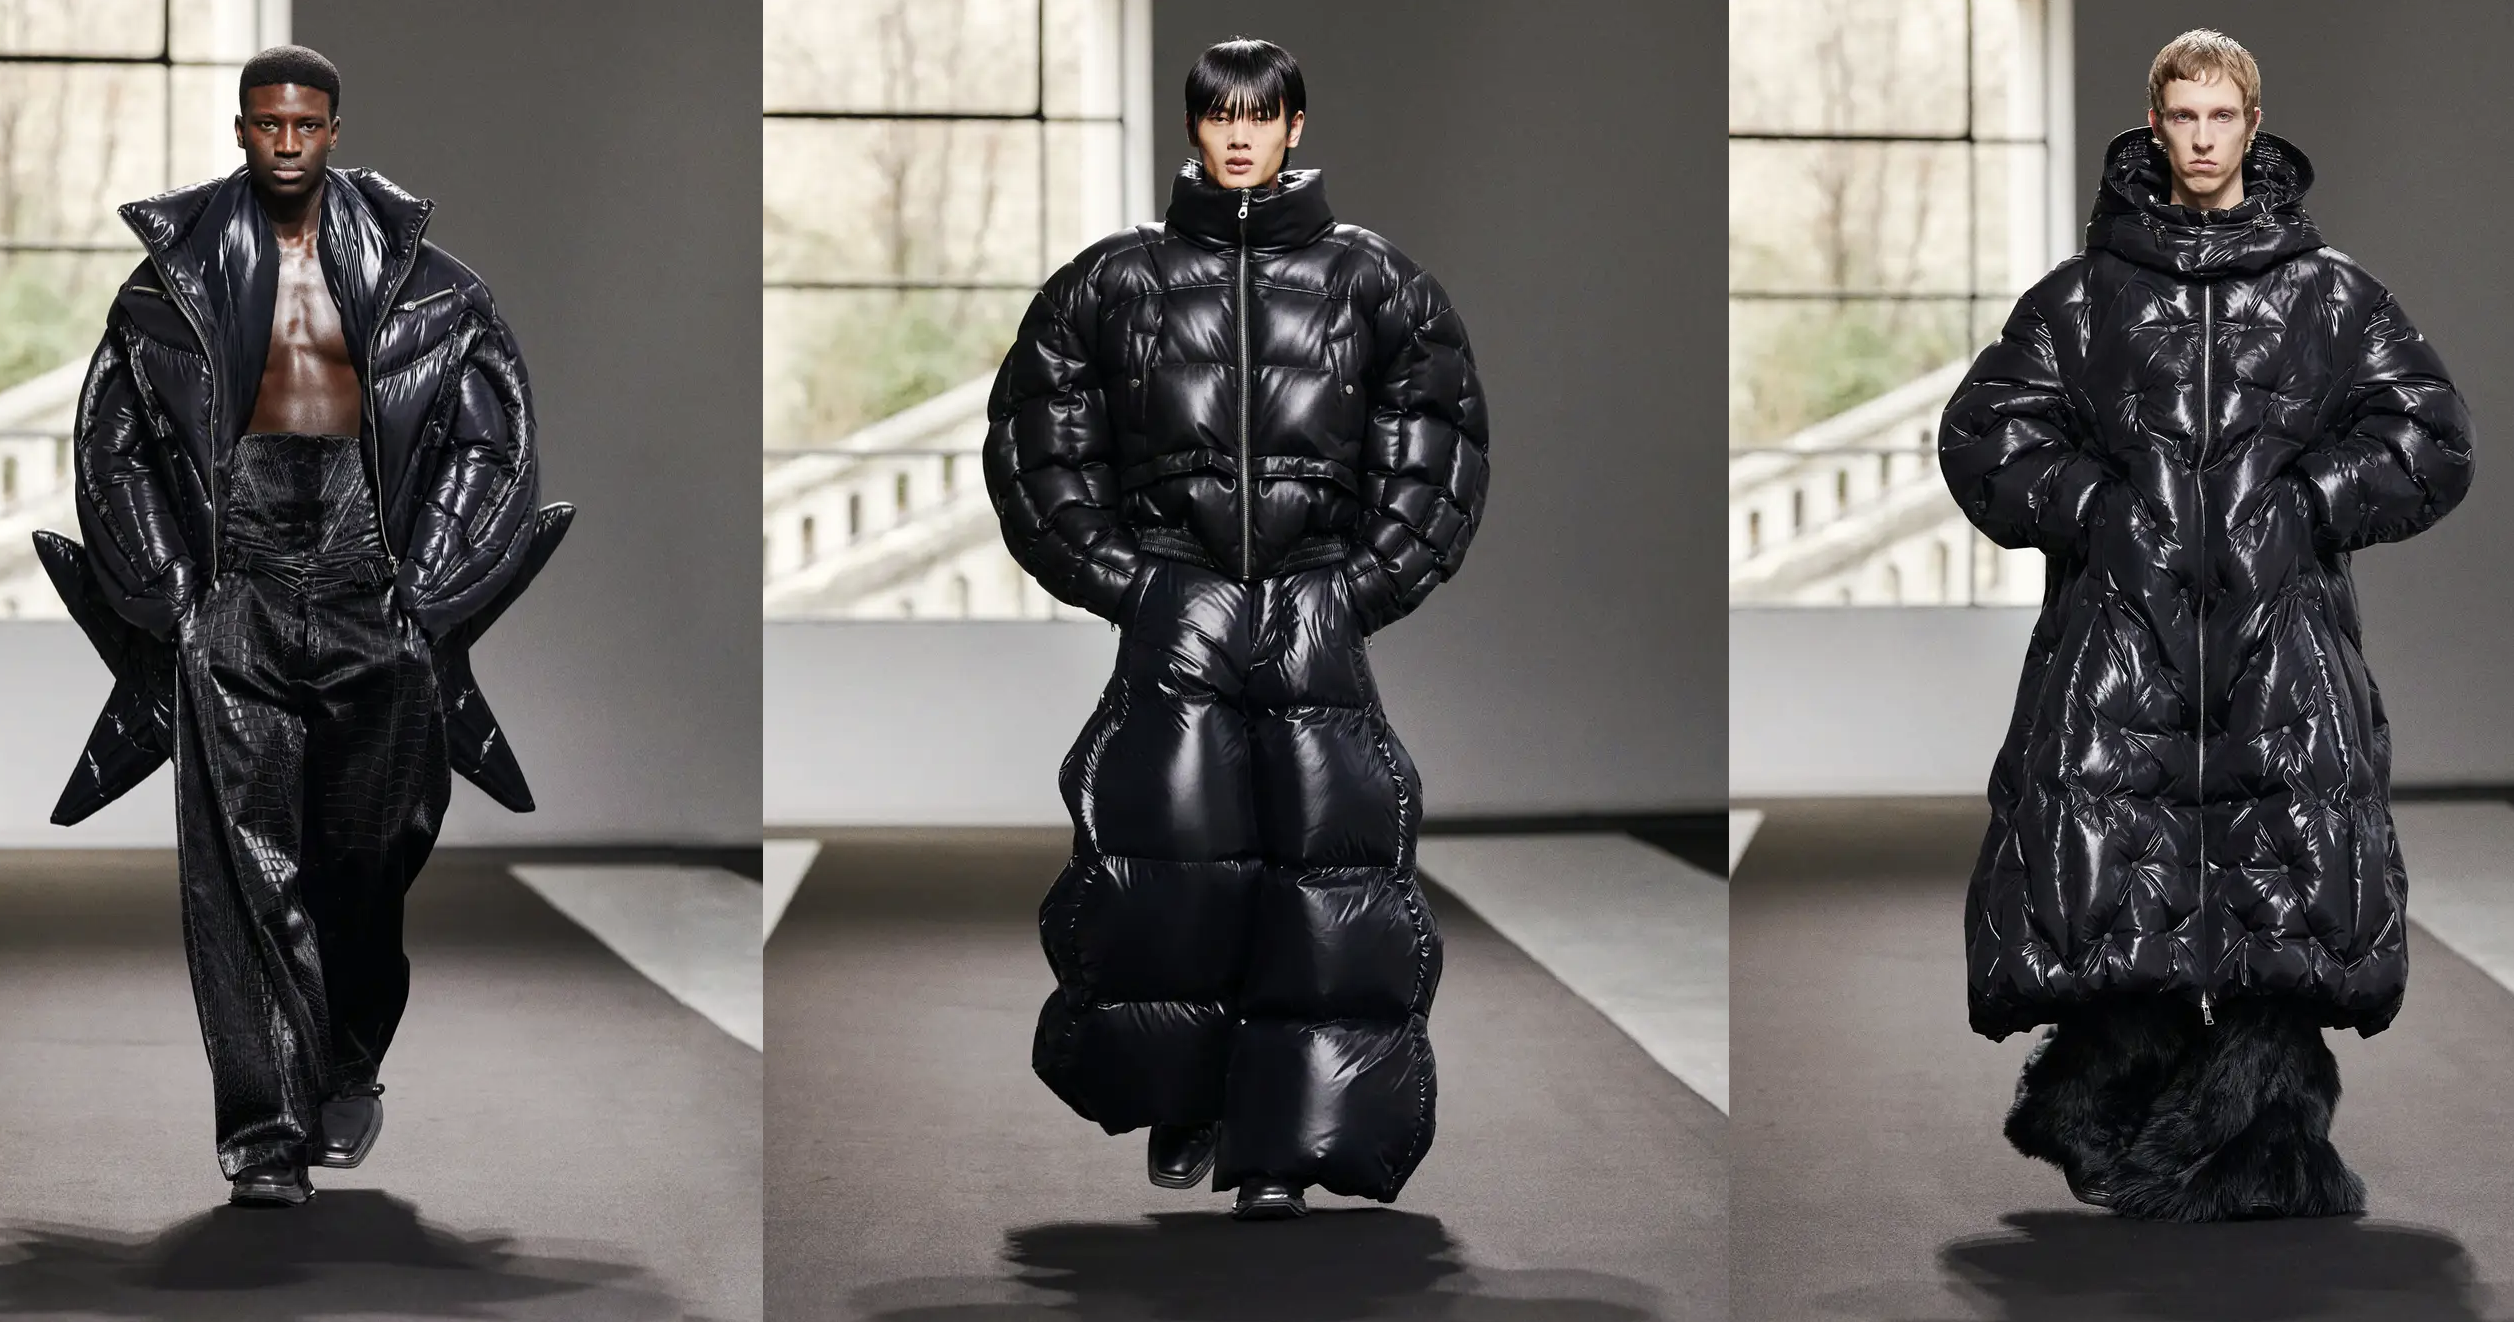 Models walk the runway in a presentation of designer Chen Peng's haute couture collection. The three men are all dressed in wildly fanciful down coats, which feature black nylon shells over panels of poofy down in futuristic shapes that cover them from head to toe, like a Darth Vader version of the Michelin Man.